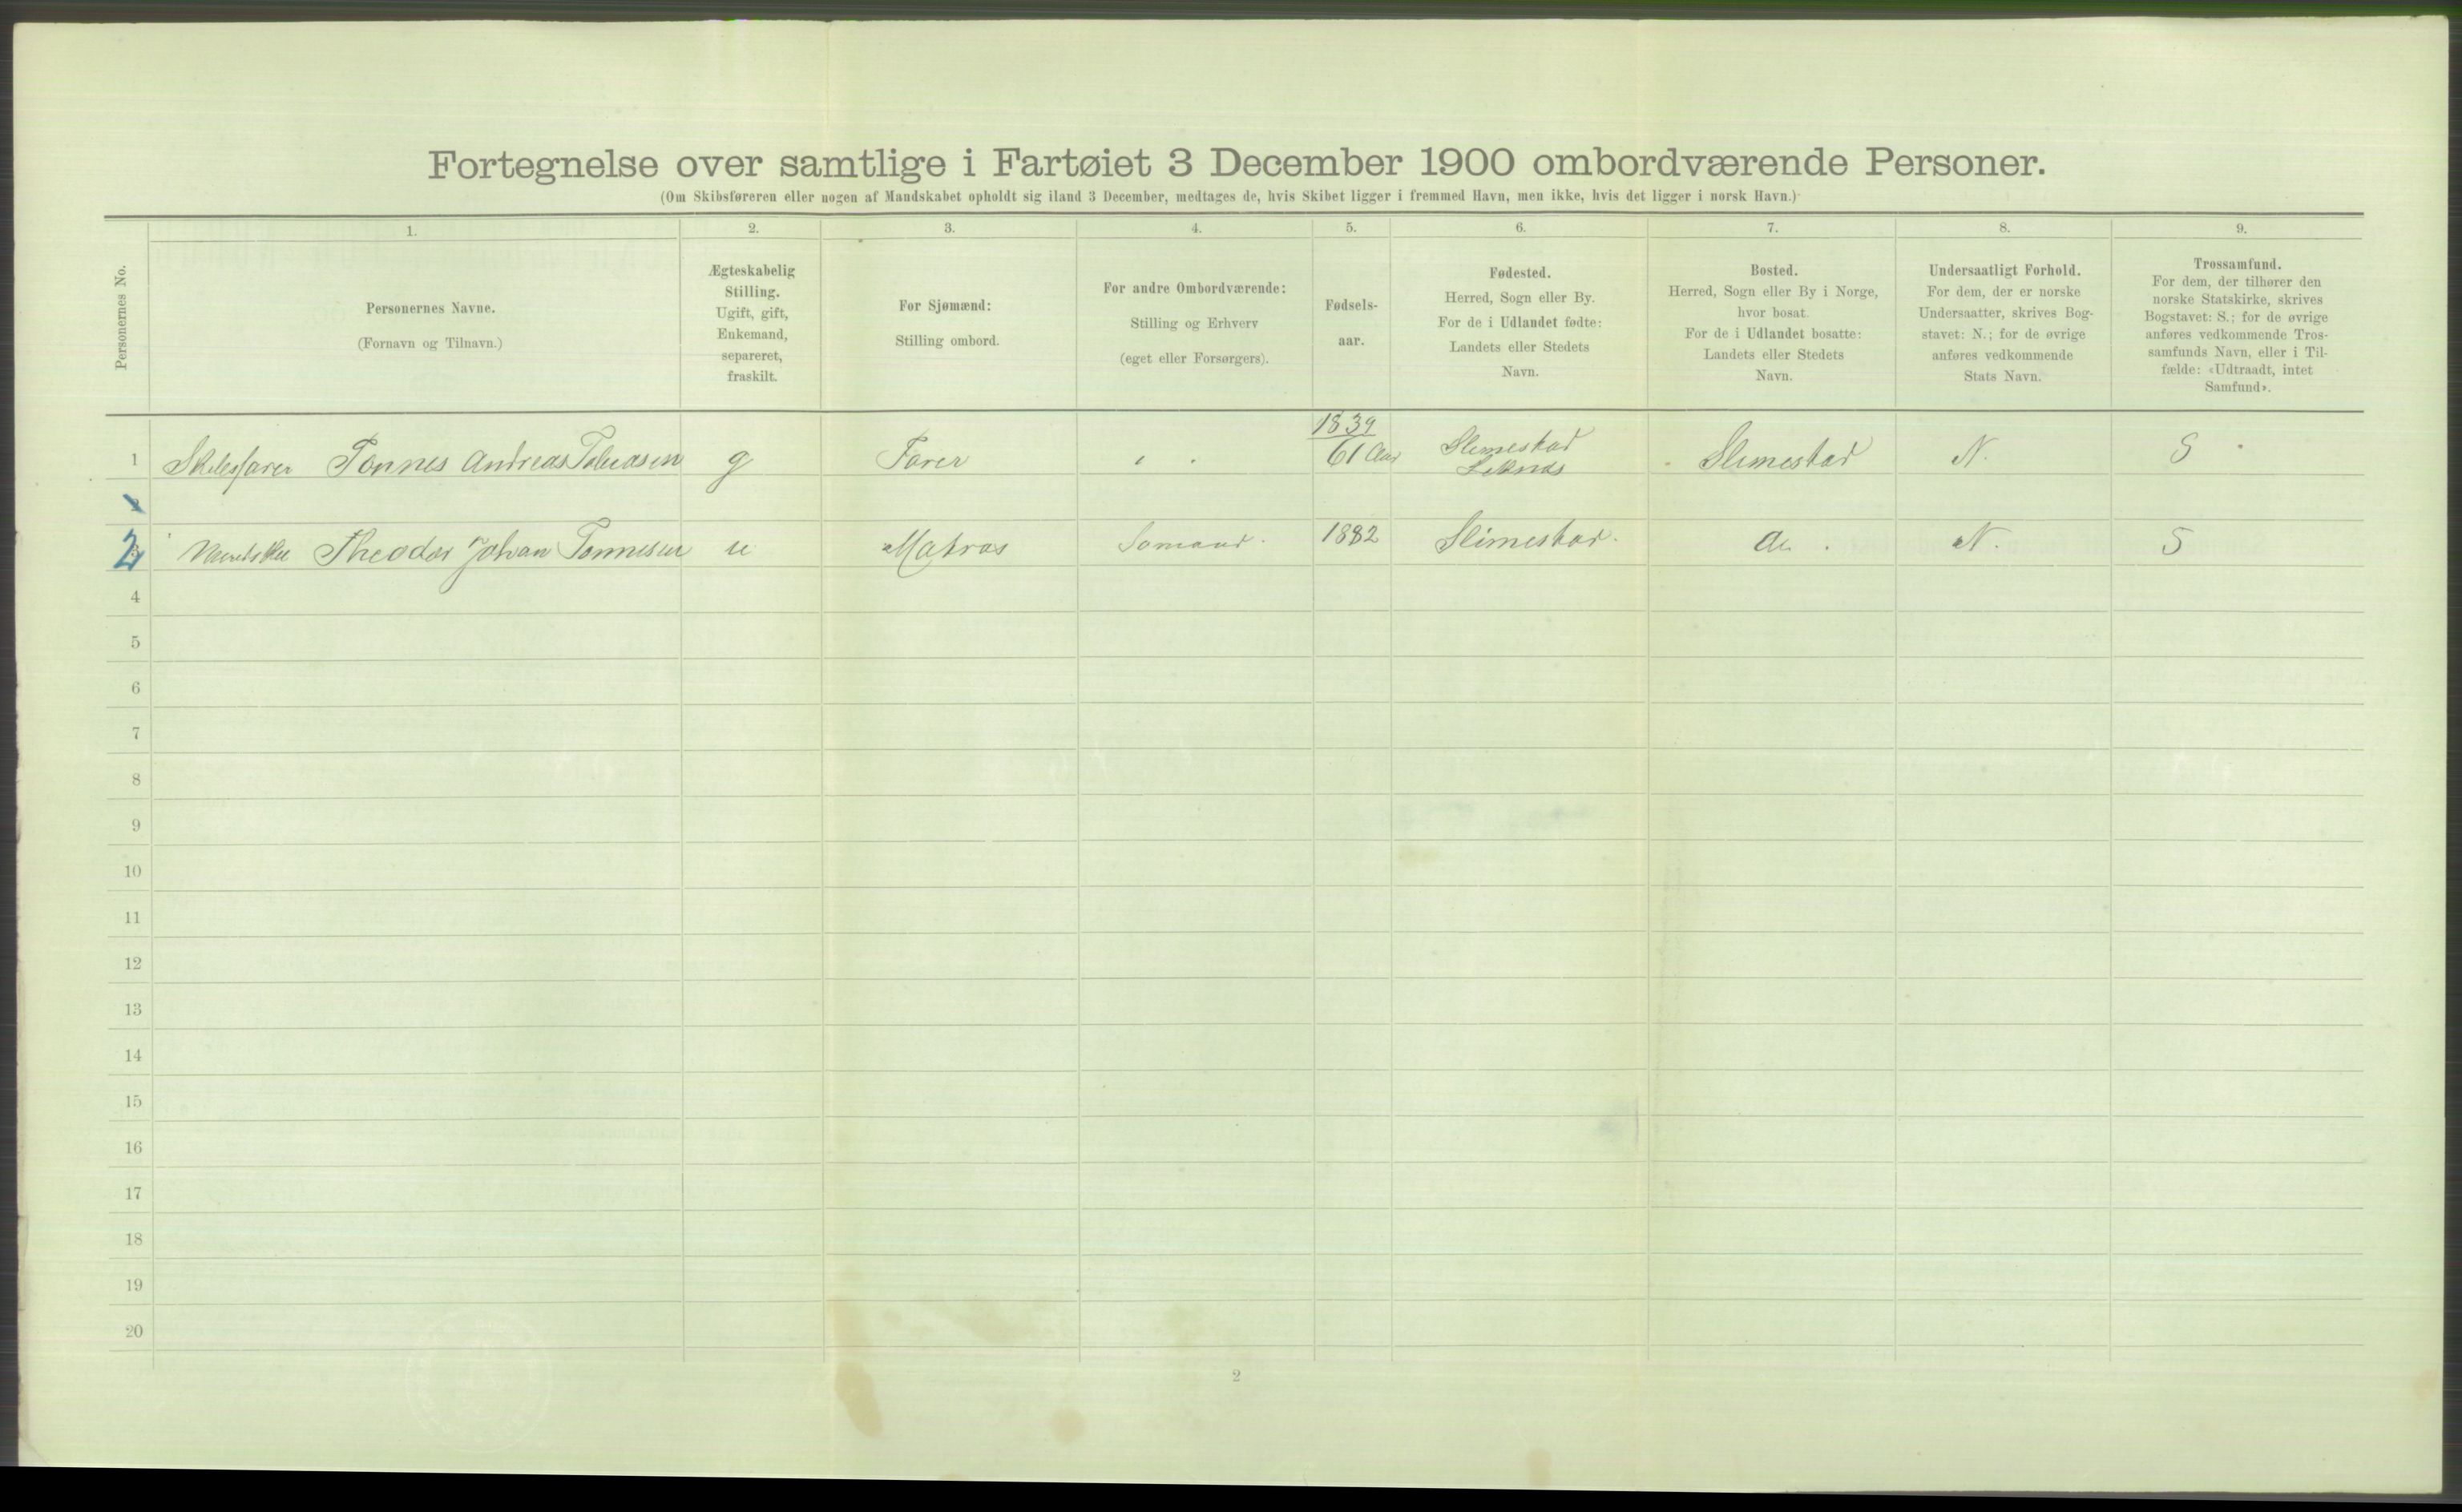 RA, 1900 Census - ship lists from ships in Norwegian harbours, harbours abroad and at sea, 1900, p. 824